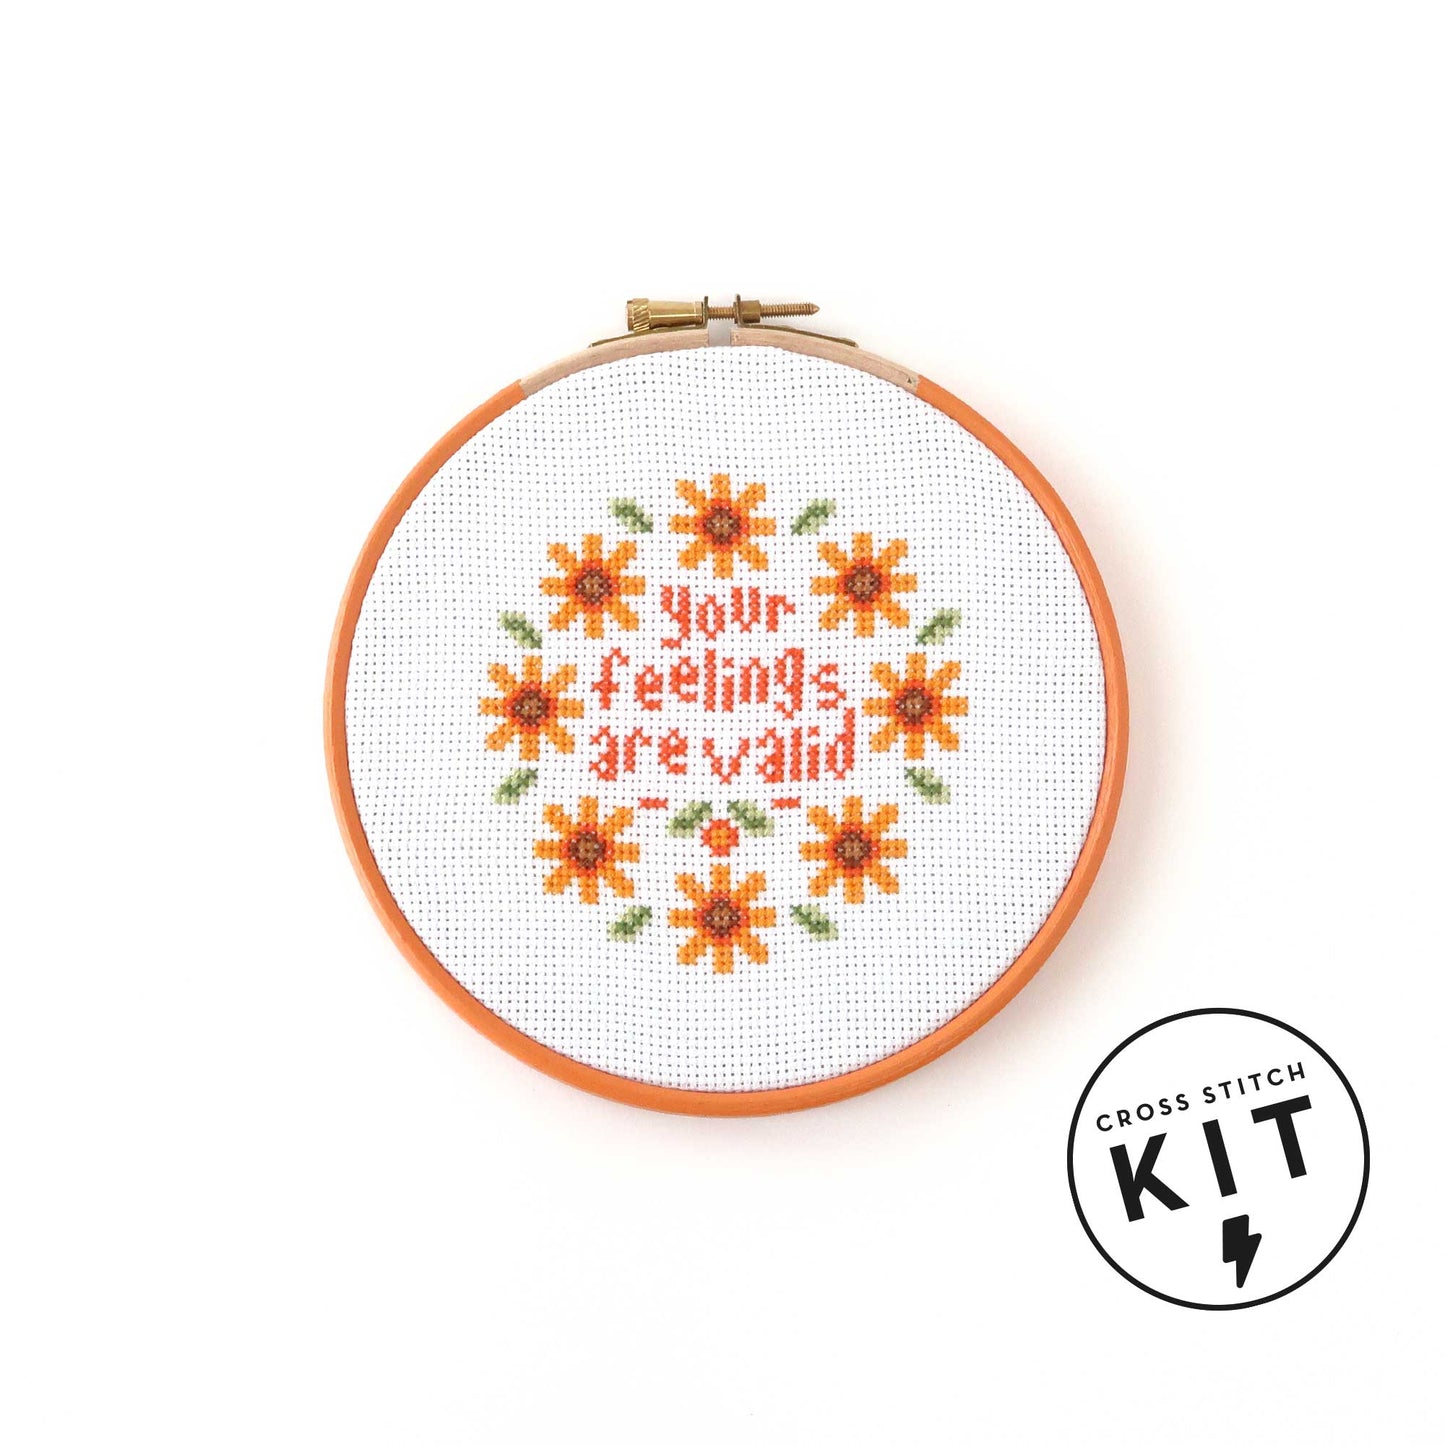 Your Cross Stitch & Embroidery